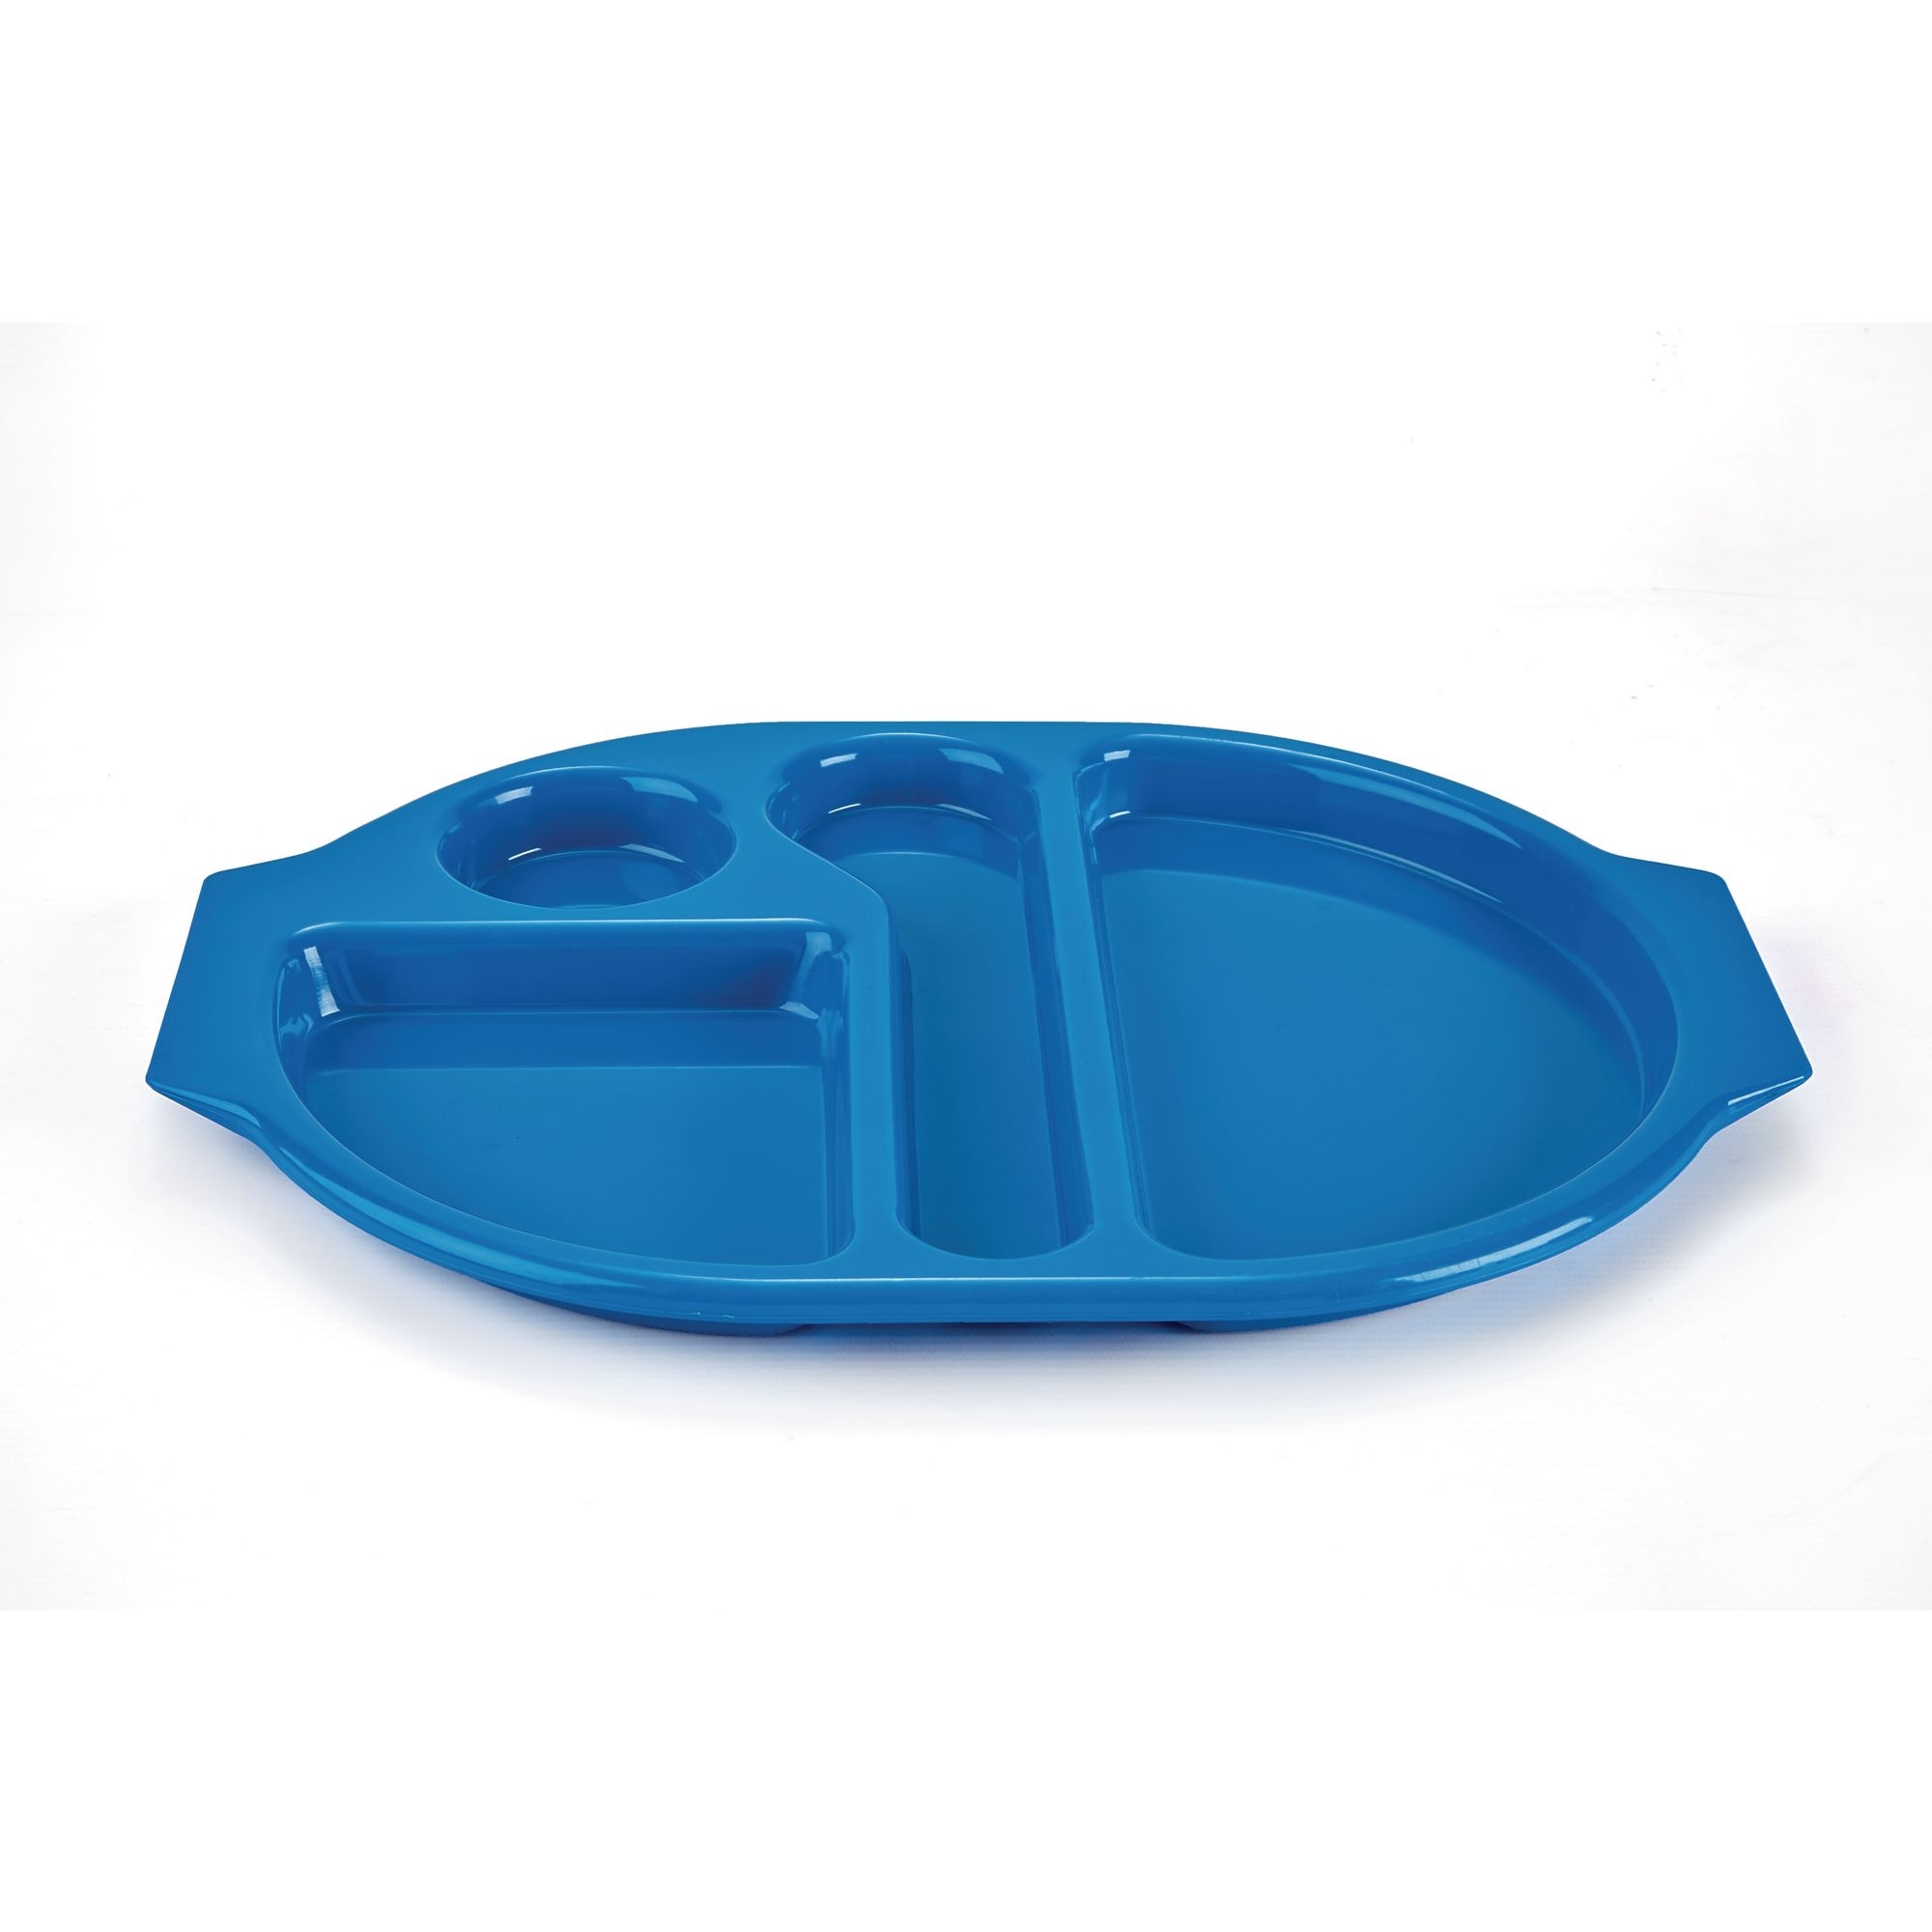 Meal Trays - Large - Blue